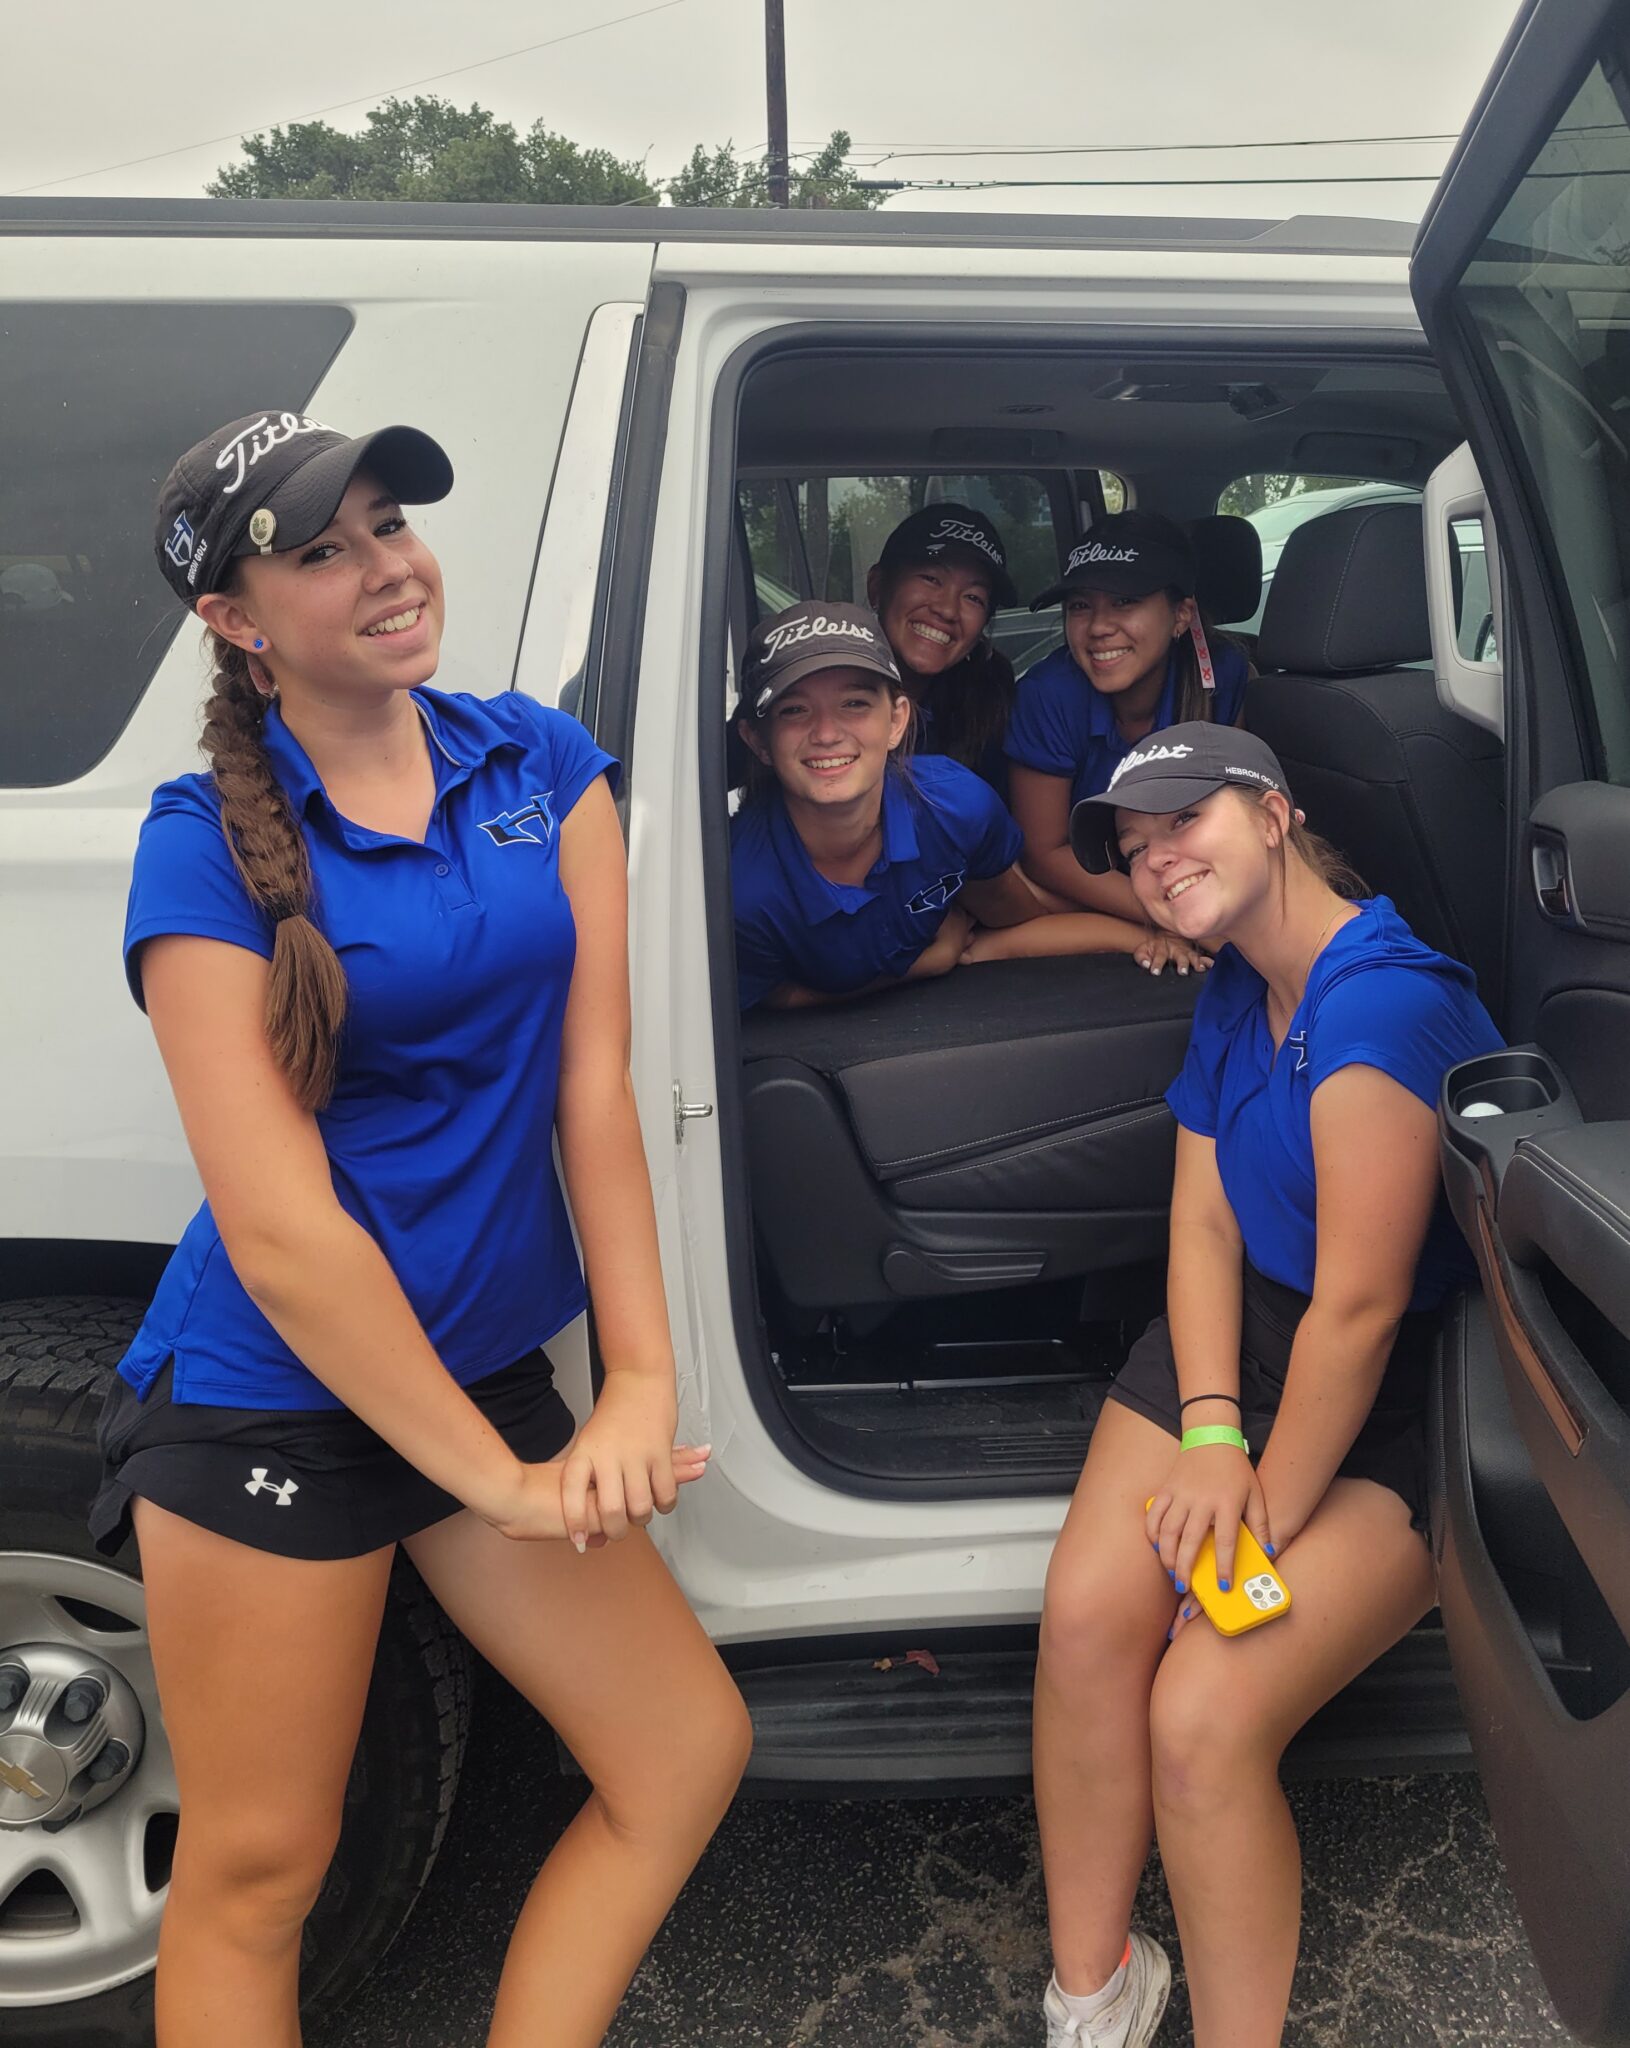 A Group of Girls in Blue and Black in a Van